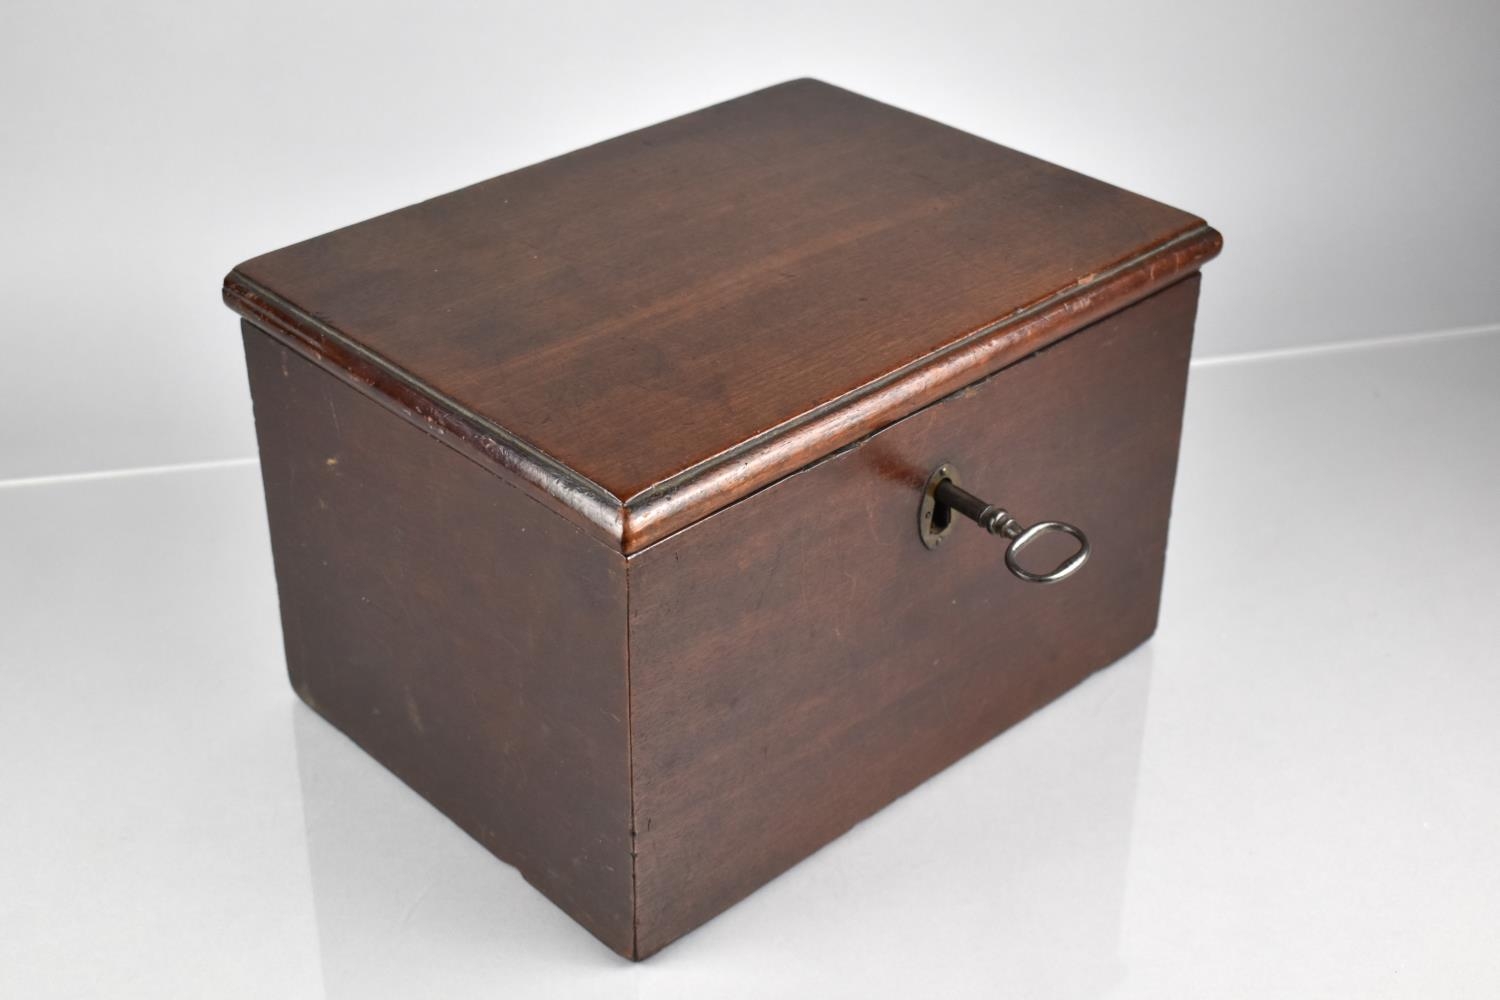 An Early 19th Century Mahogany Box with Hinged Lid with Original Lock and Key, 30x22x19cm High - Image 2 of 4